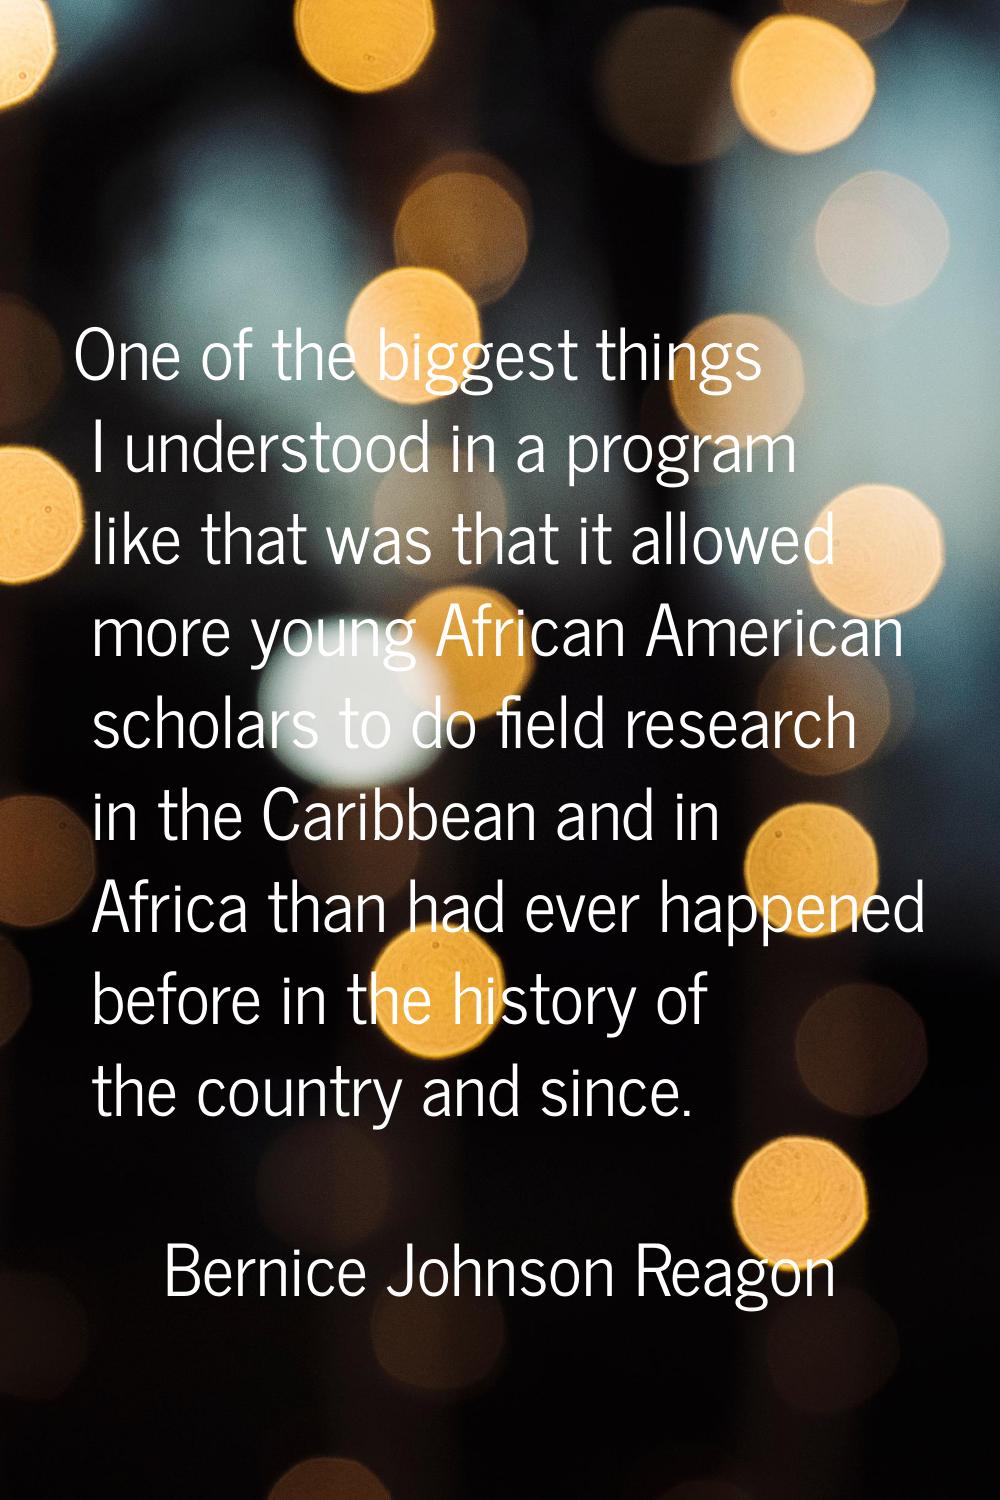 One of the biggest things I understood in a program like that was that it allowed more young Africa